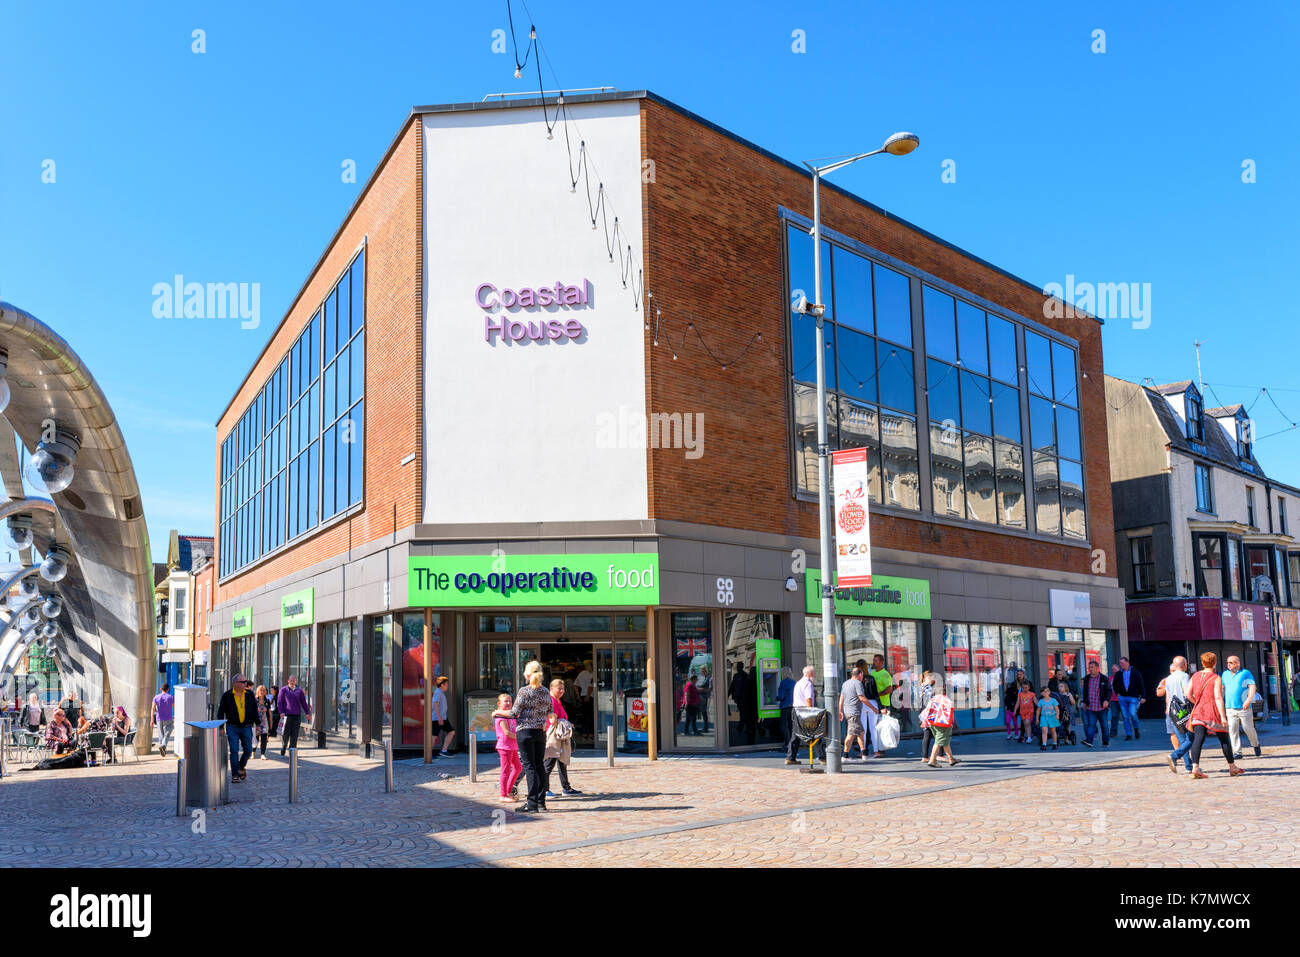 Exterior of a Cooperative supermarket in the centre of Blackpool, Lancashire, UK Stock Photo